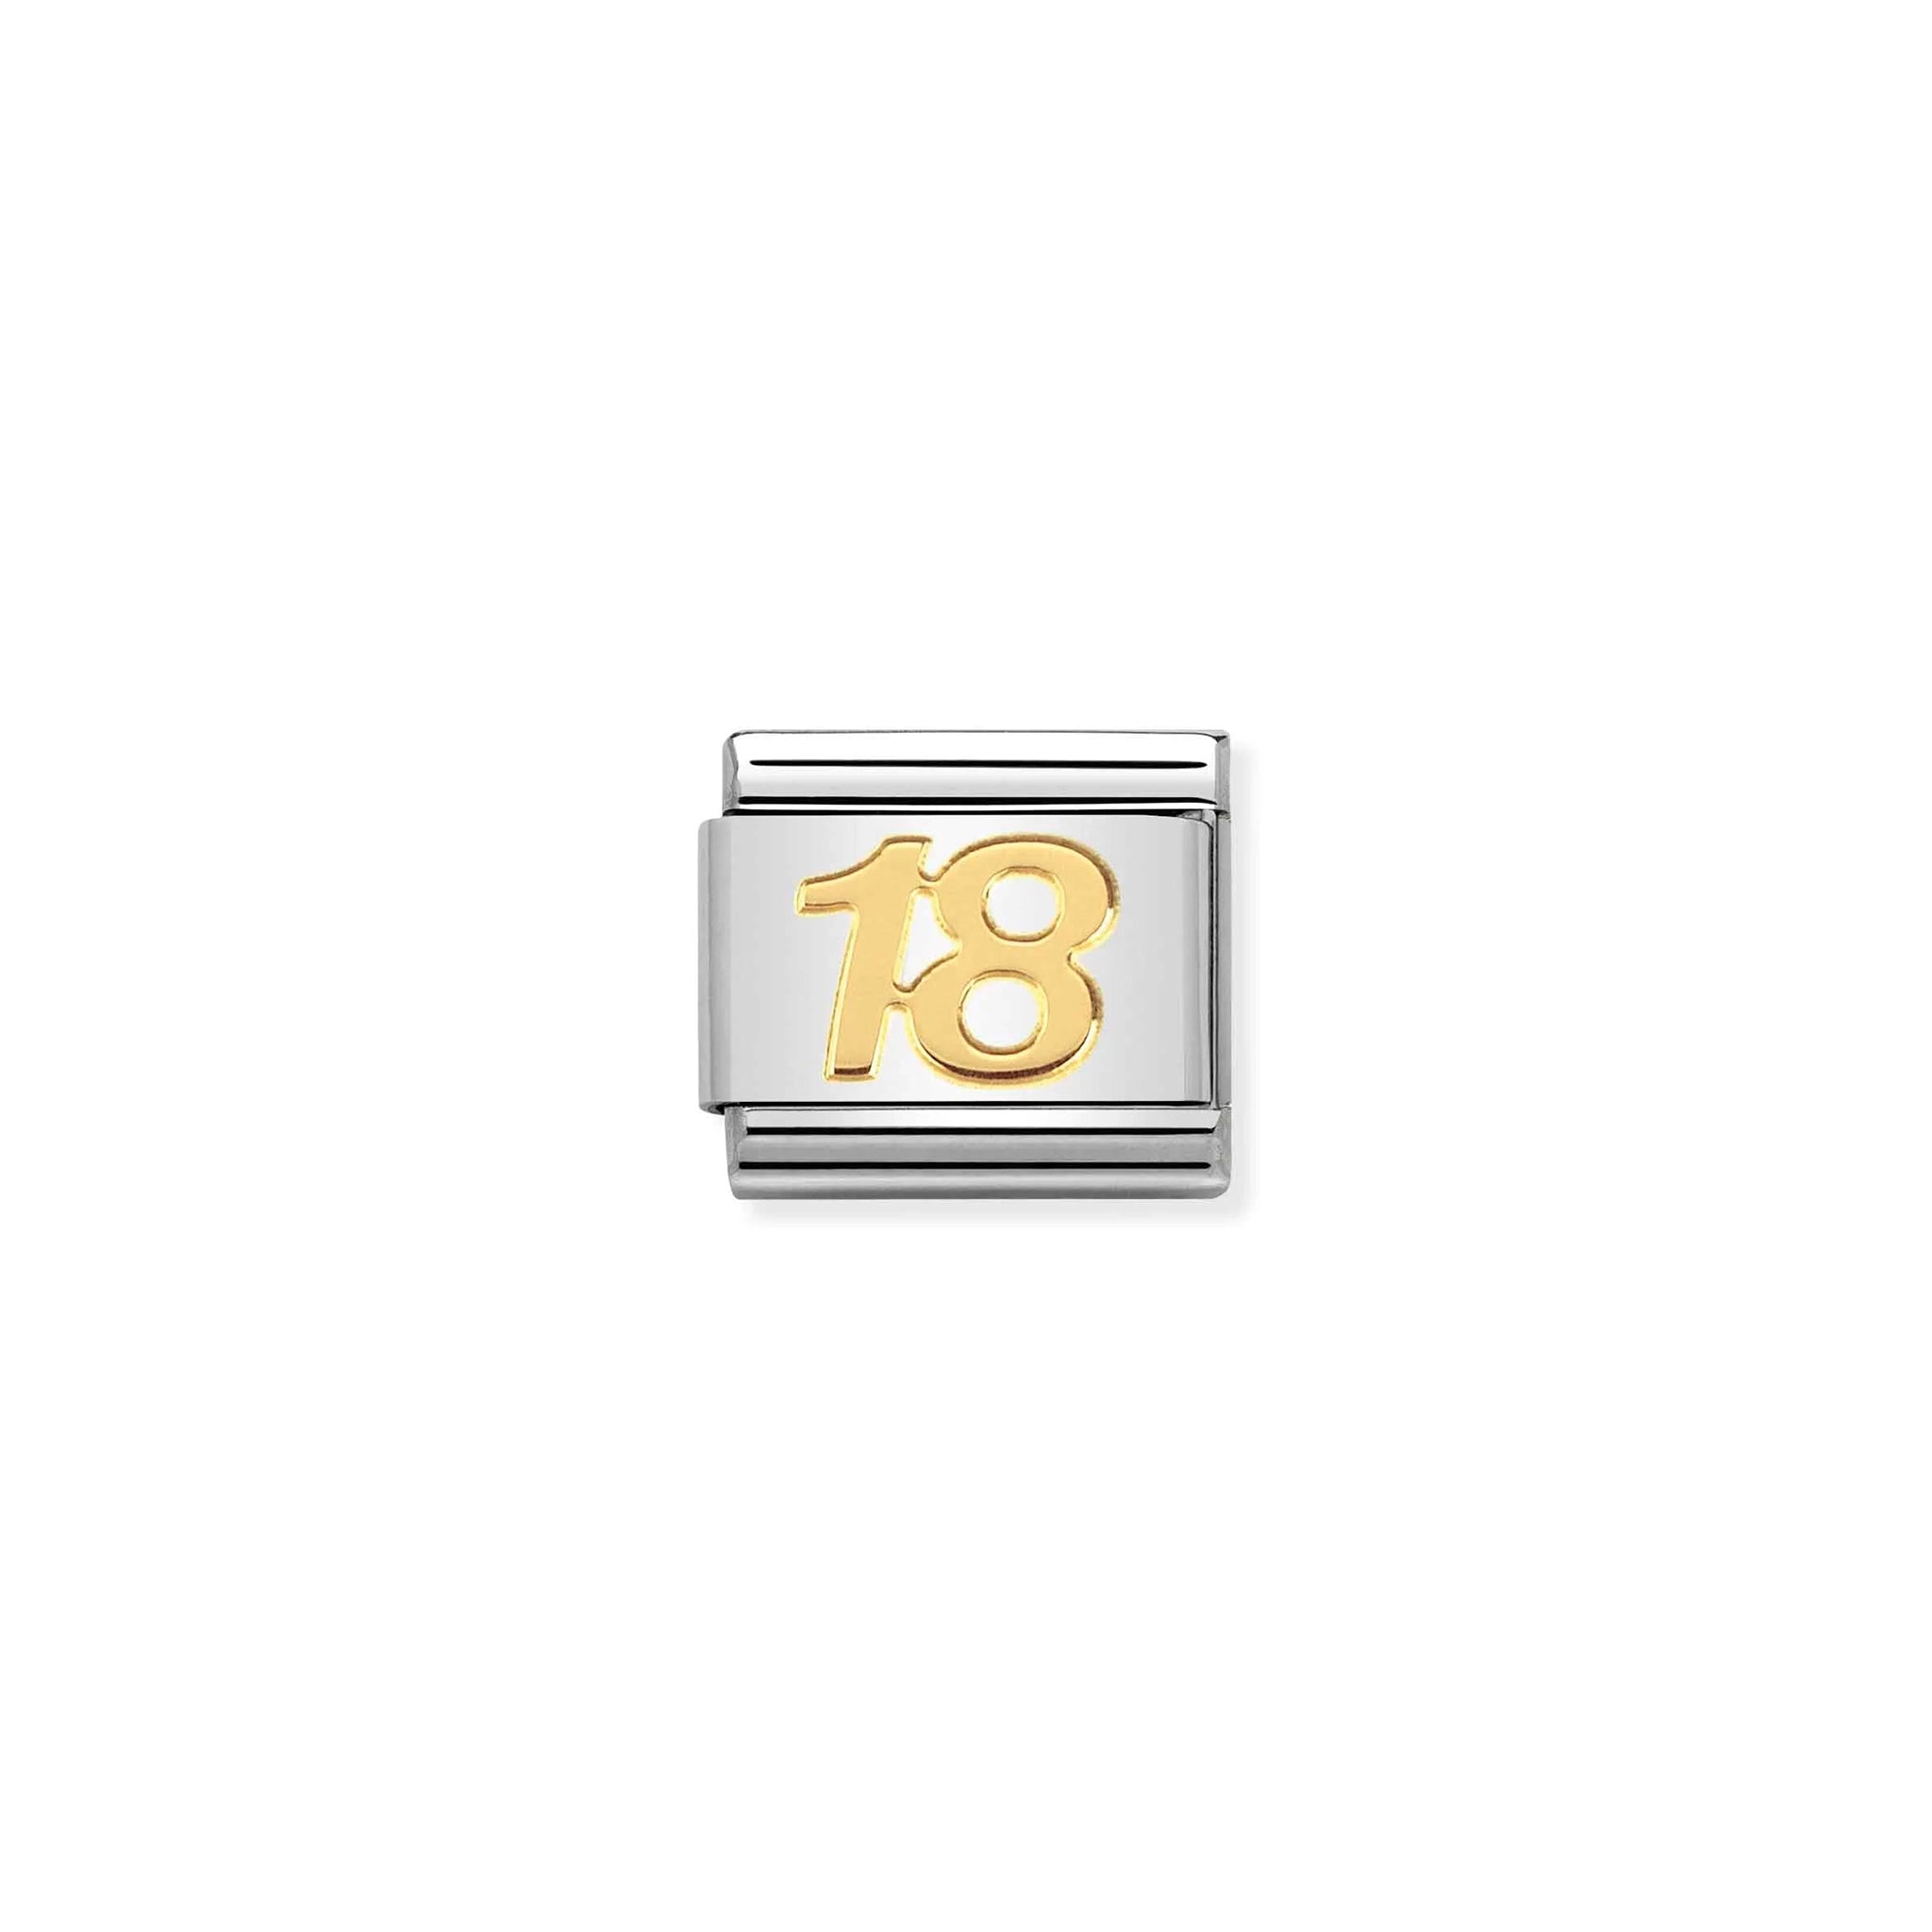 A Nomination charm link featuring a plain gold number 18